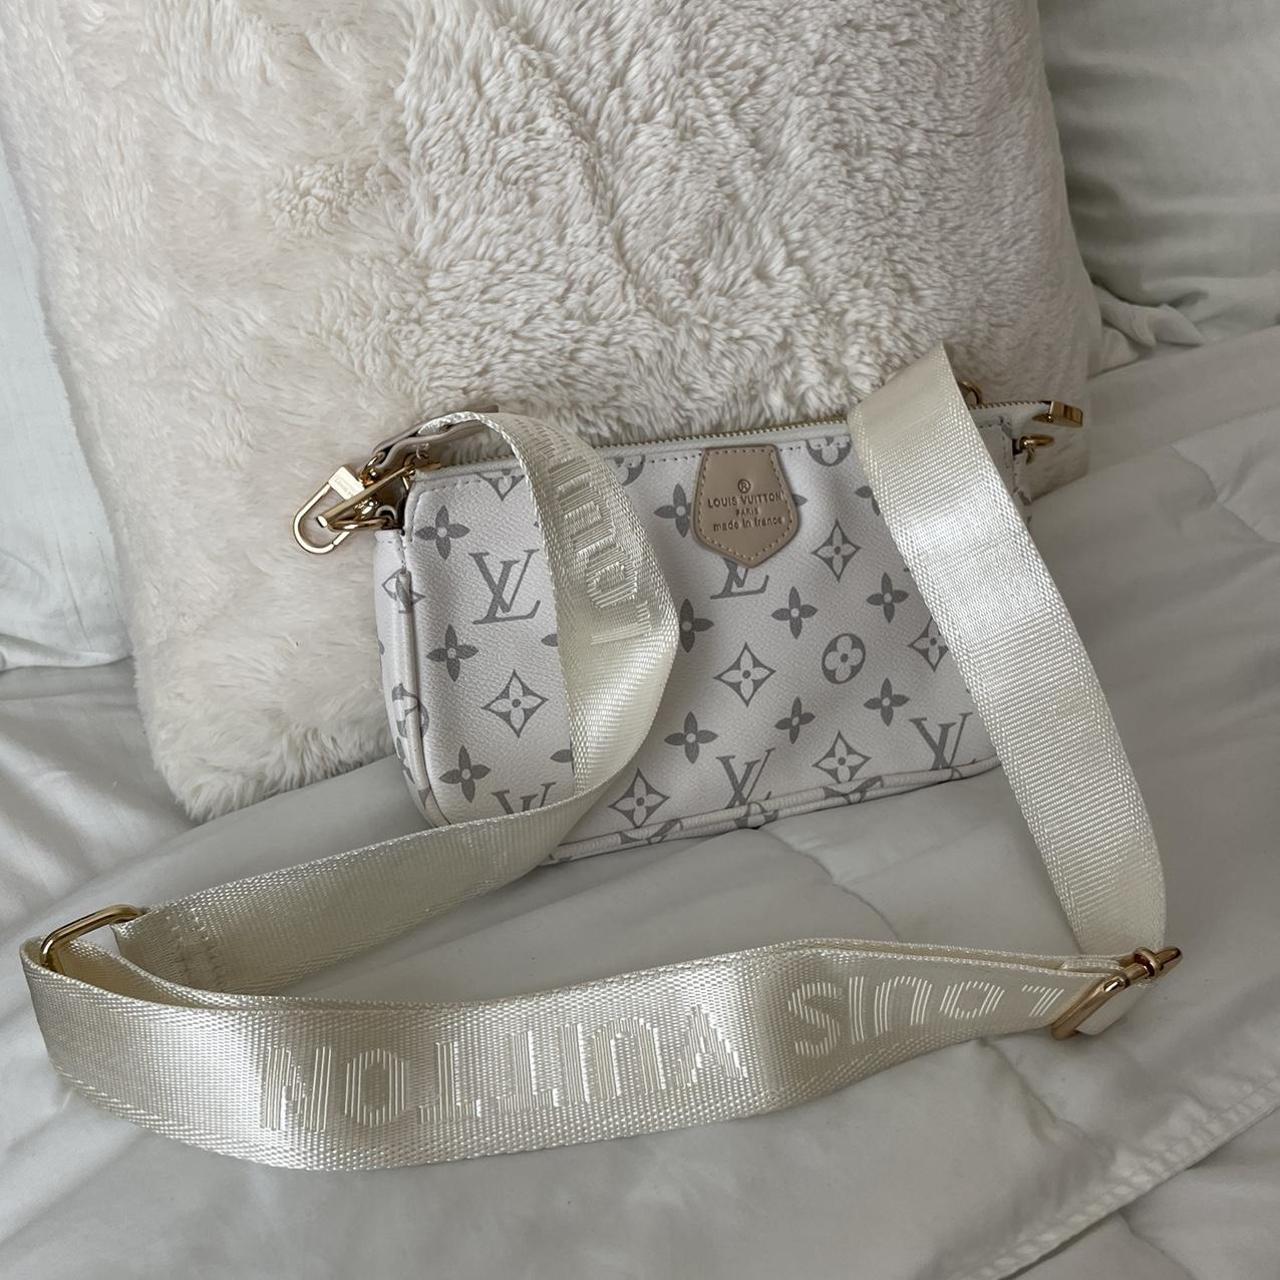 White lv bag - comes with a small round bag that is - Depop